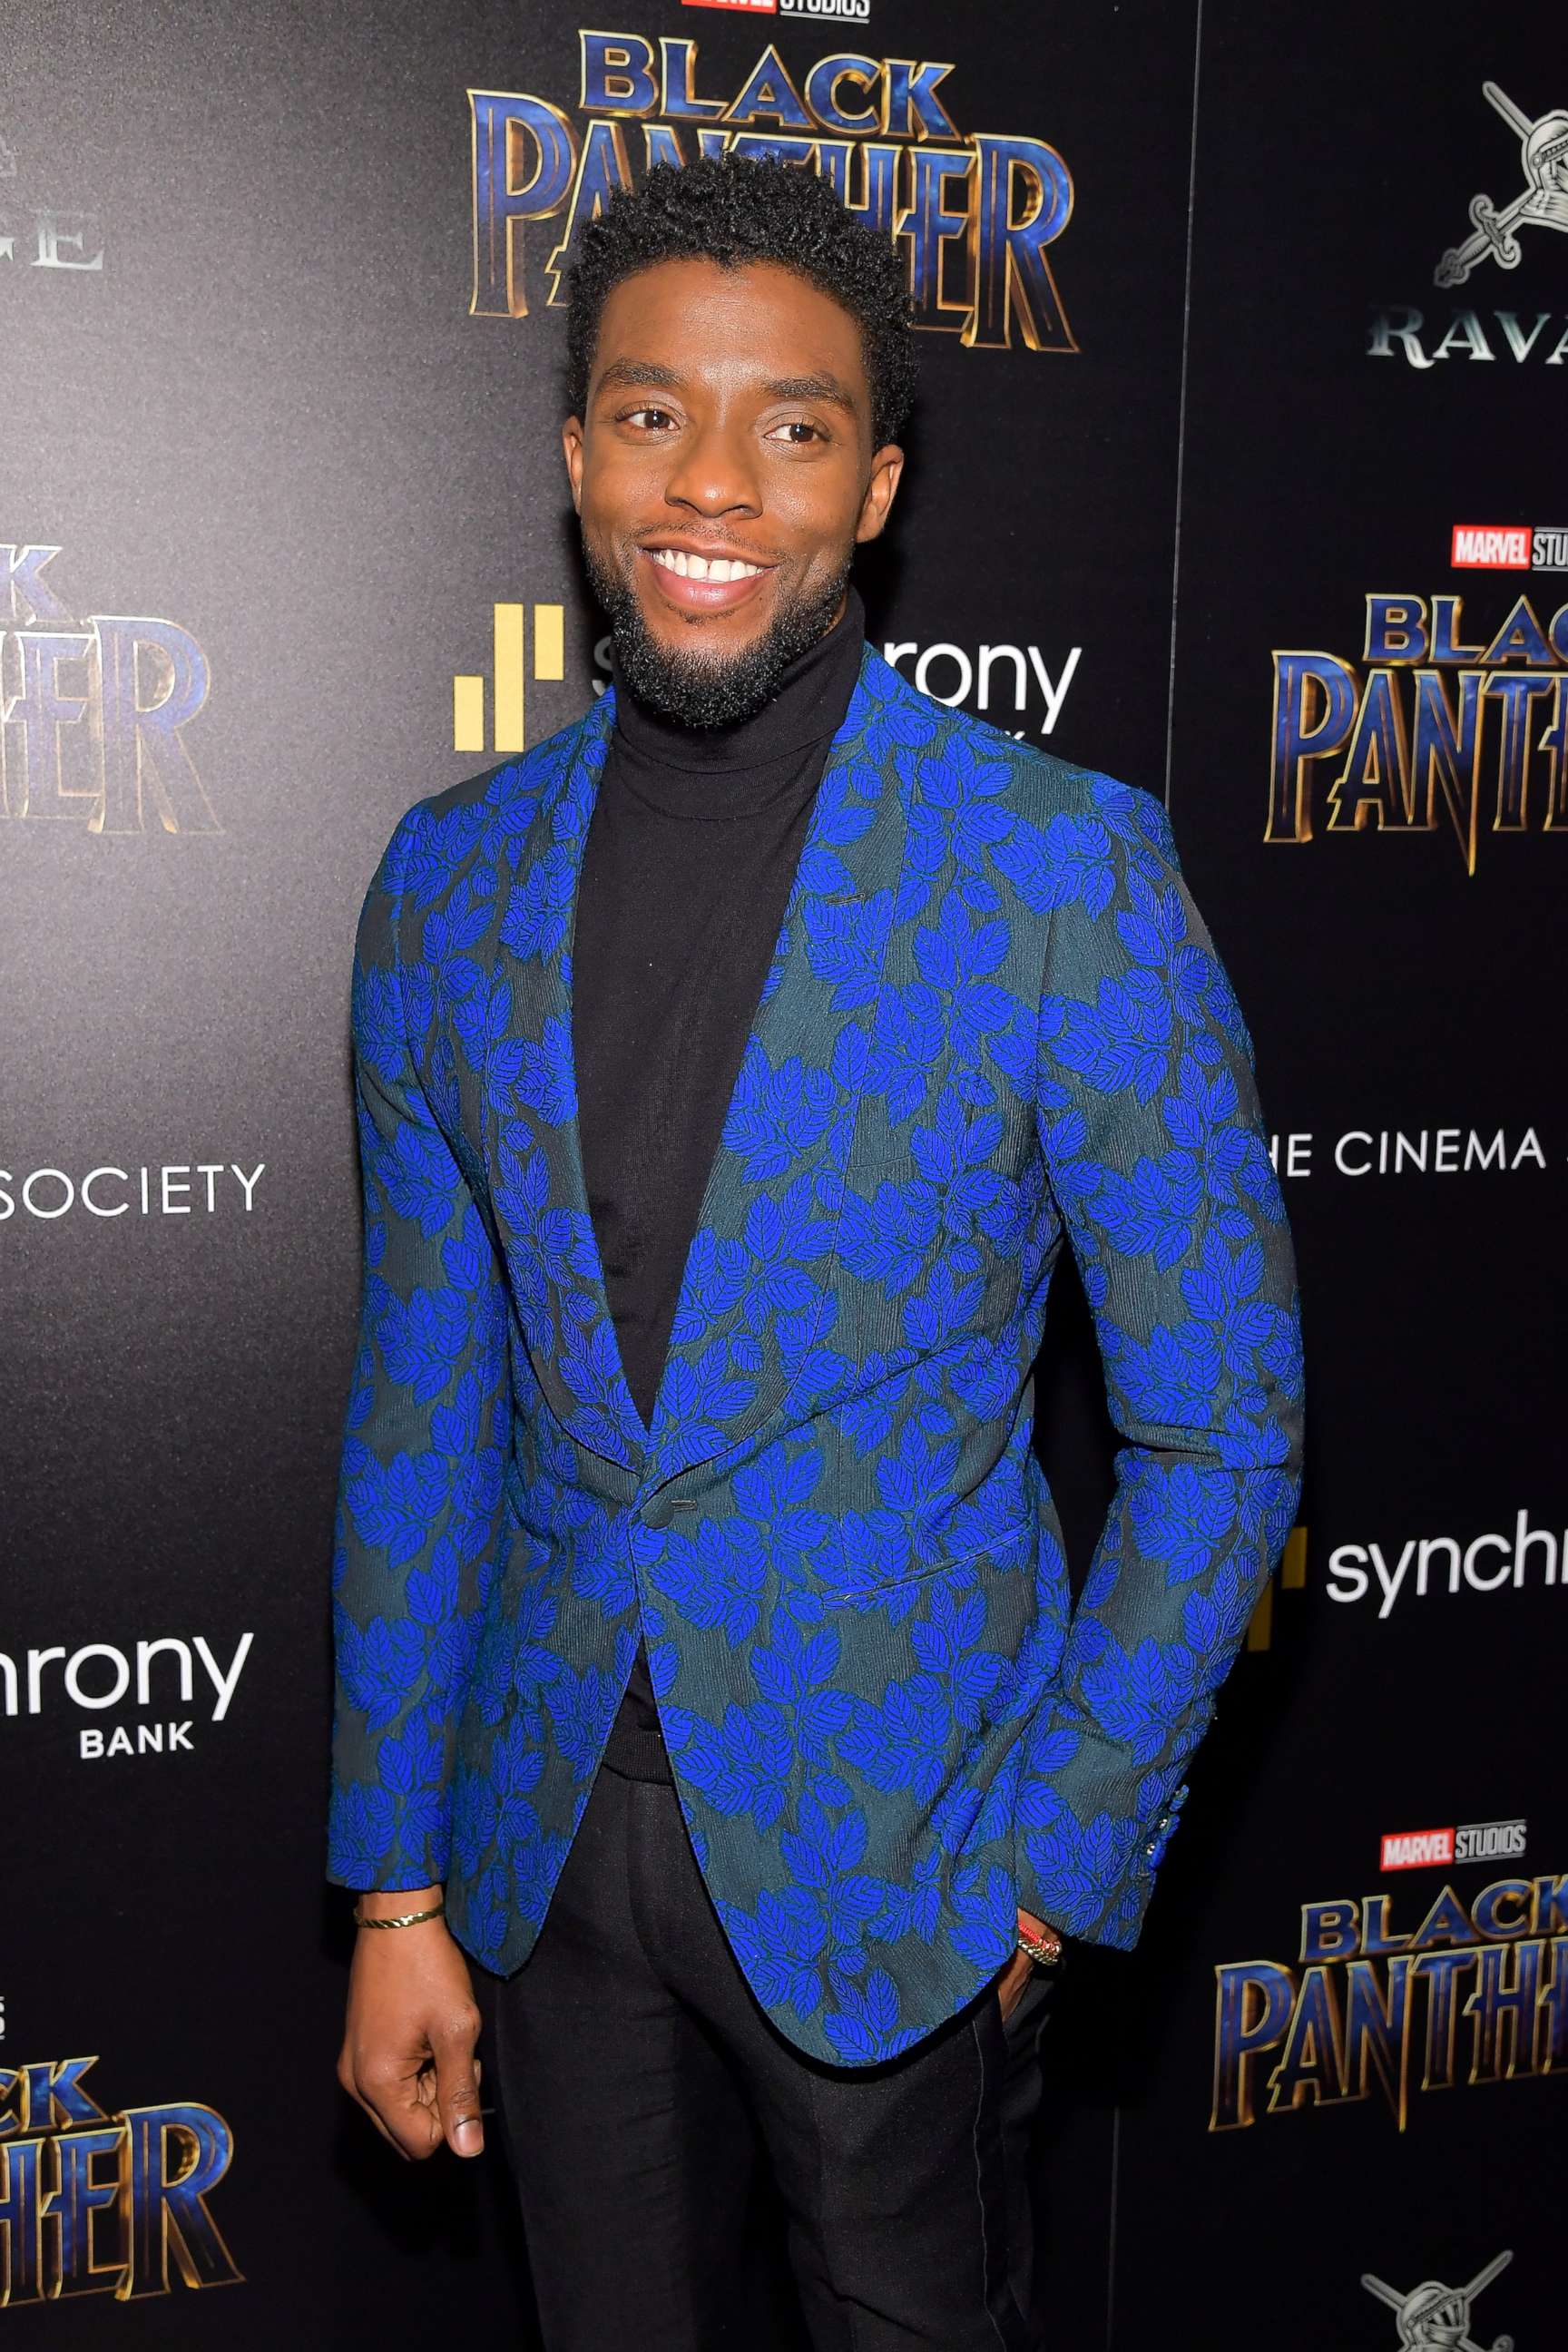 PHOTO: Chadwick Boseman attends the screening of Marvel Studios' "Black Panther" hosted by The Cinema Society, Feb. 13, 2018 in New York City.